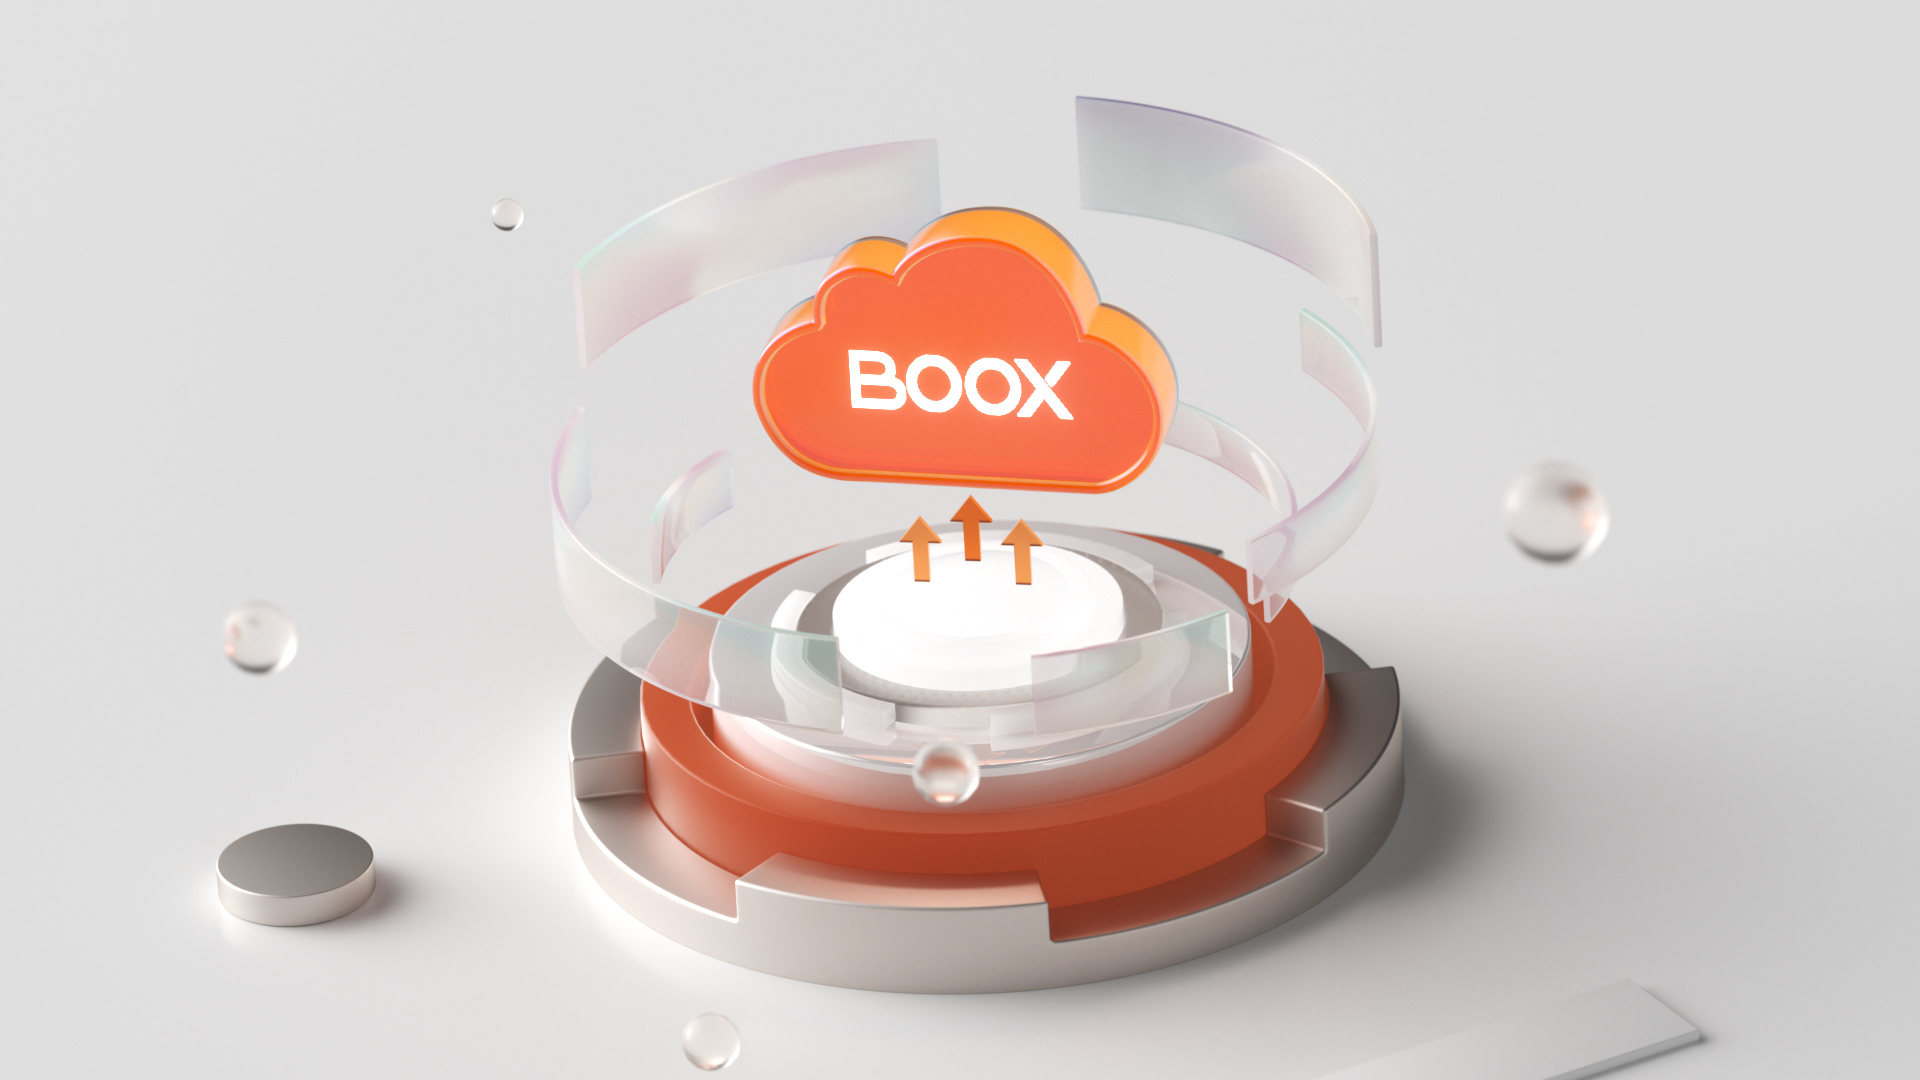 Onyx BOOX Announces Upgraded Free Cloud Storage to 10GB and Increased OCR Times